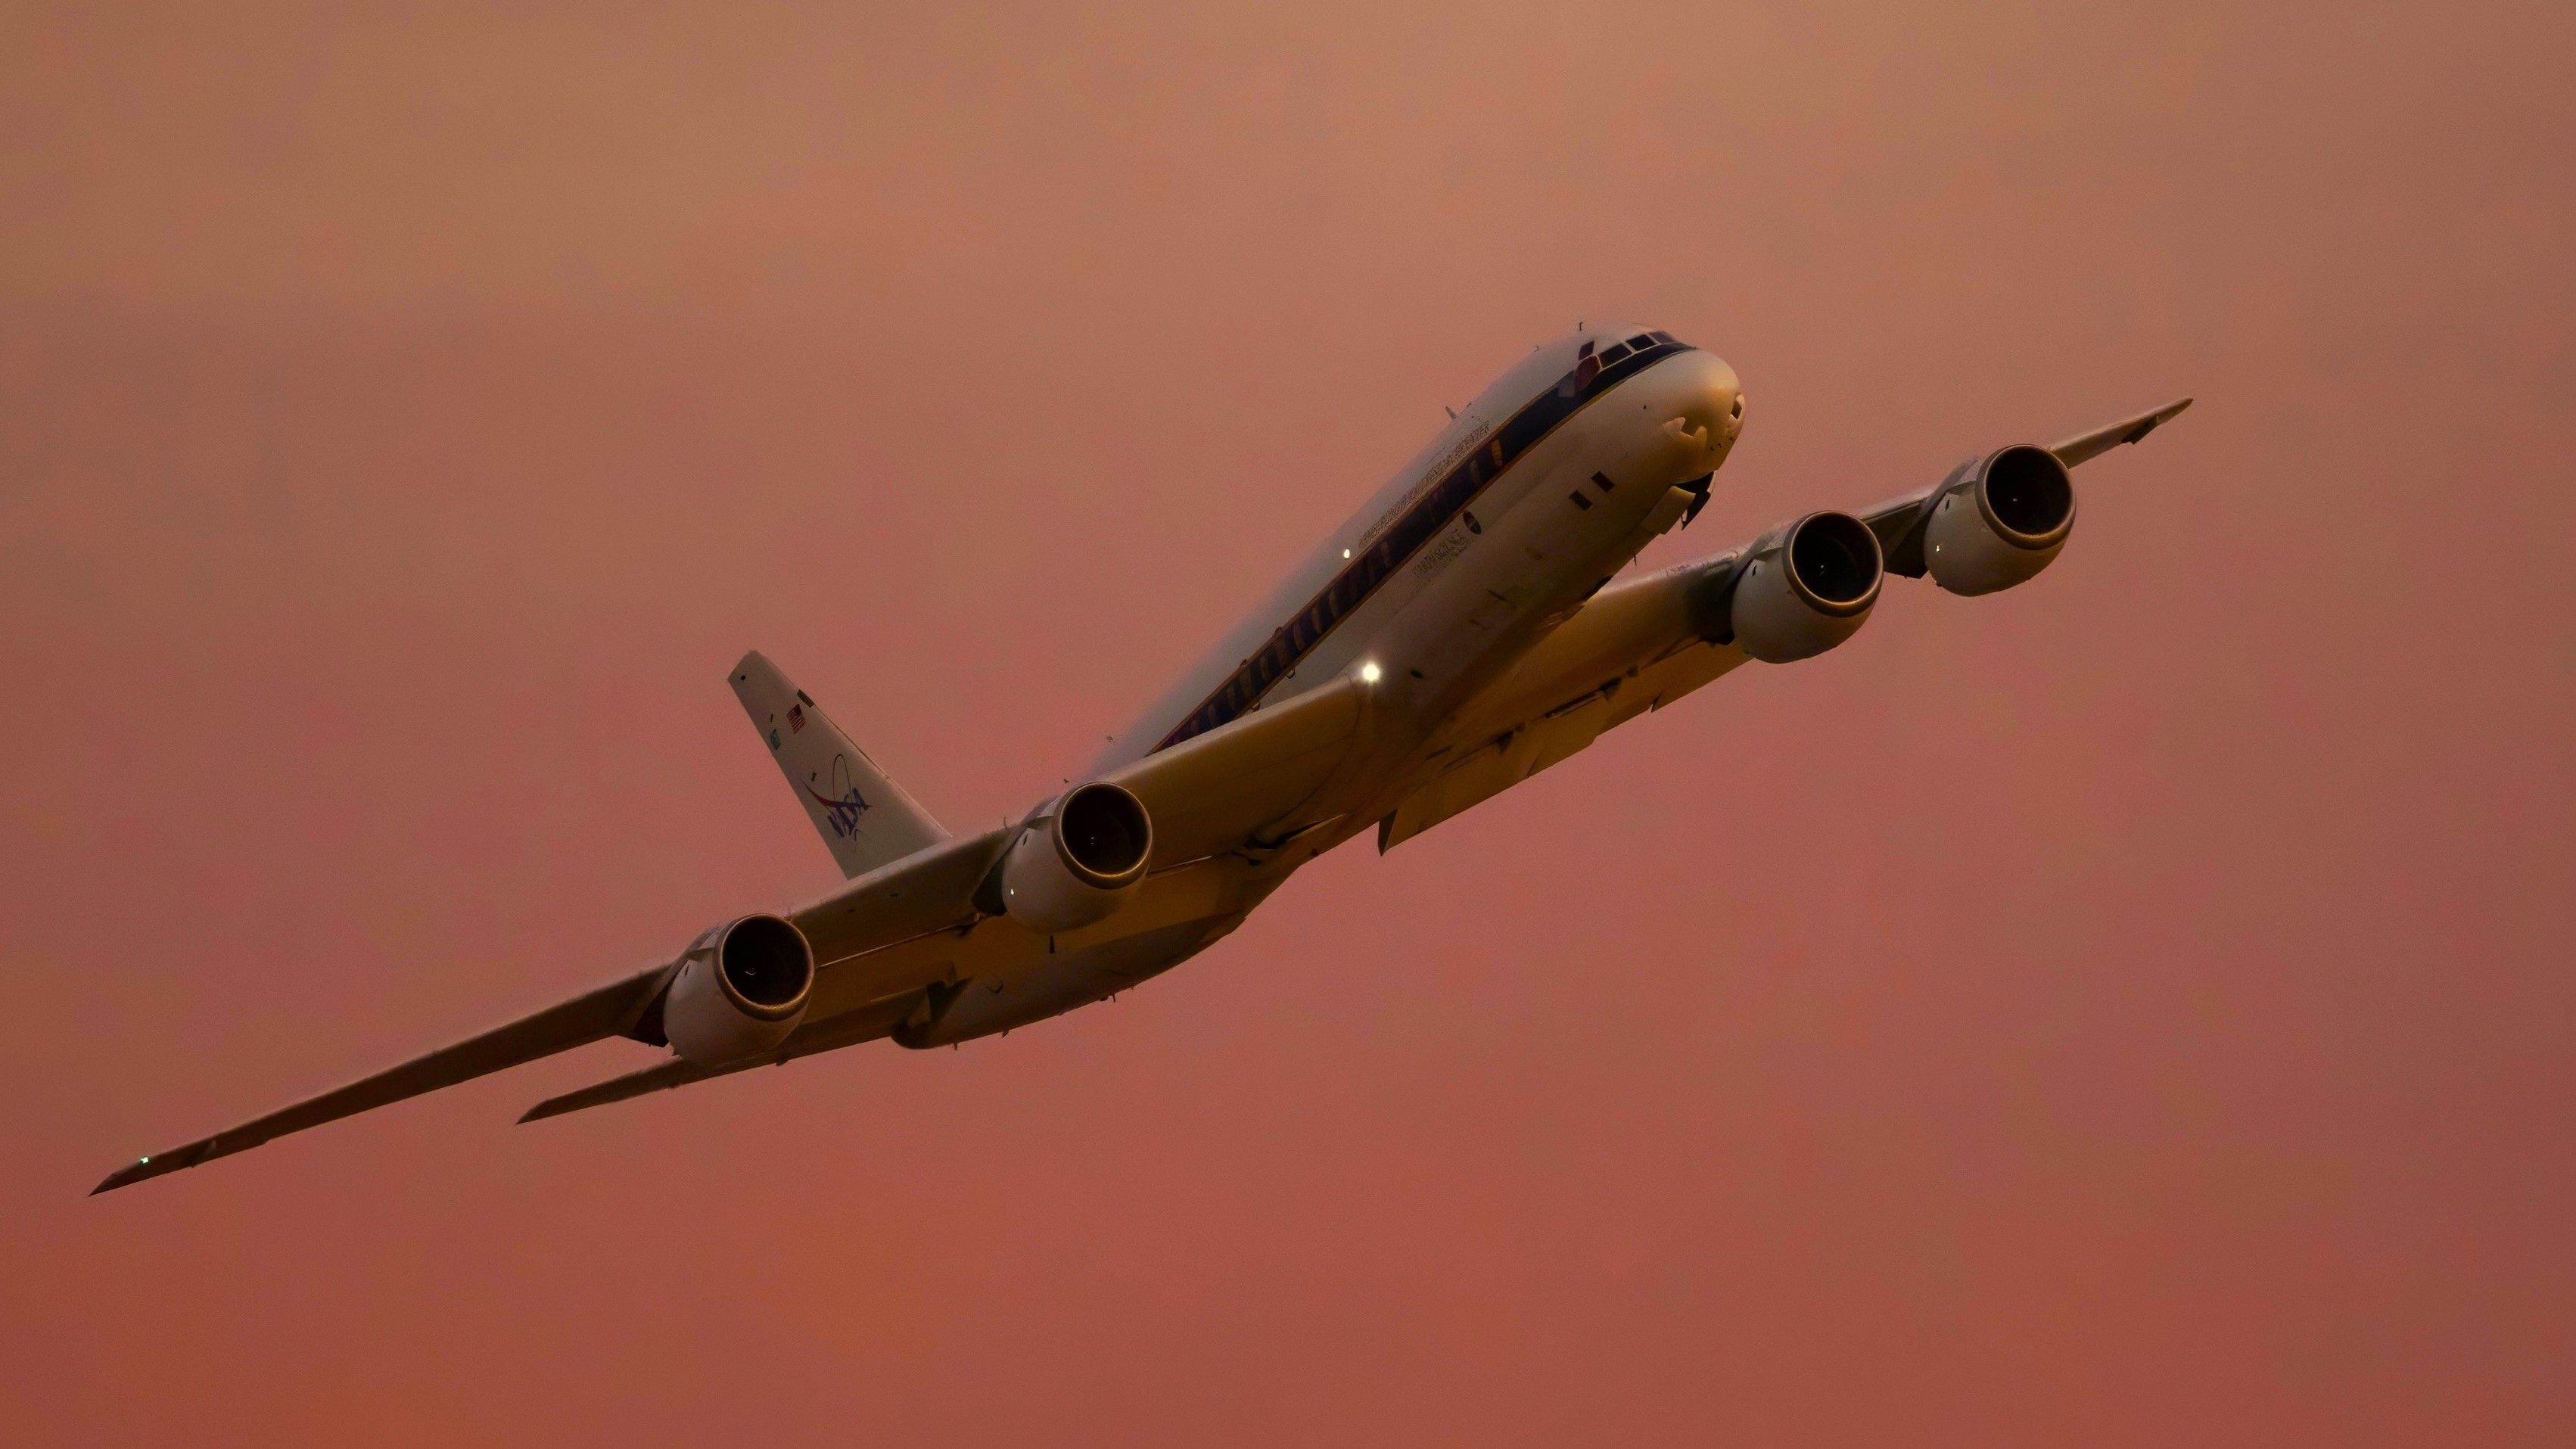 A DC-8 flying in the sky.